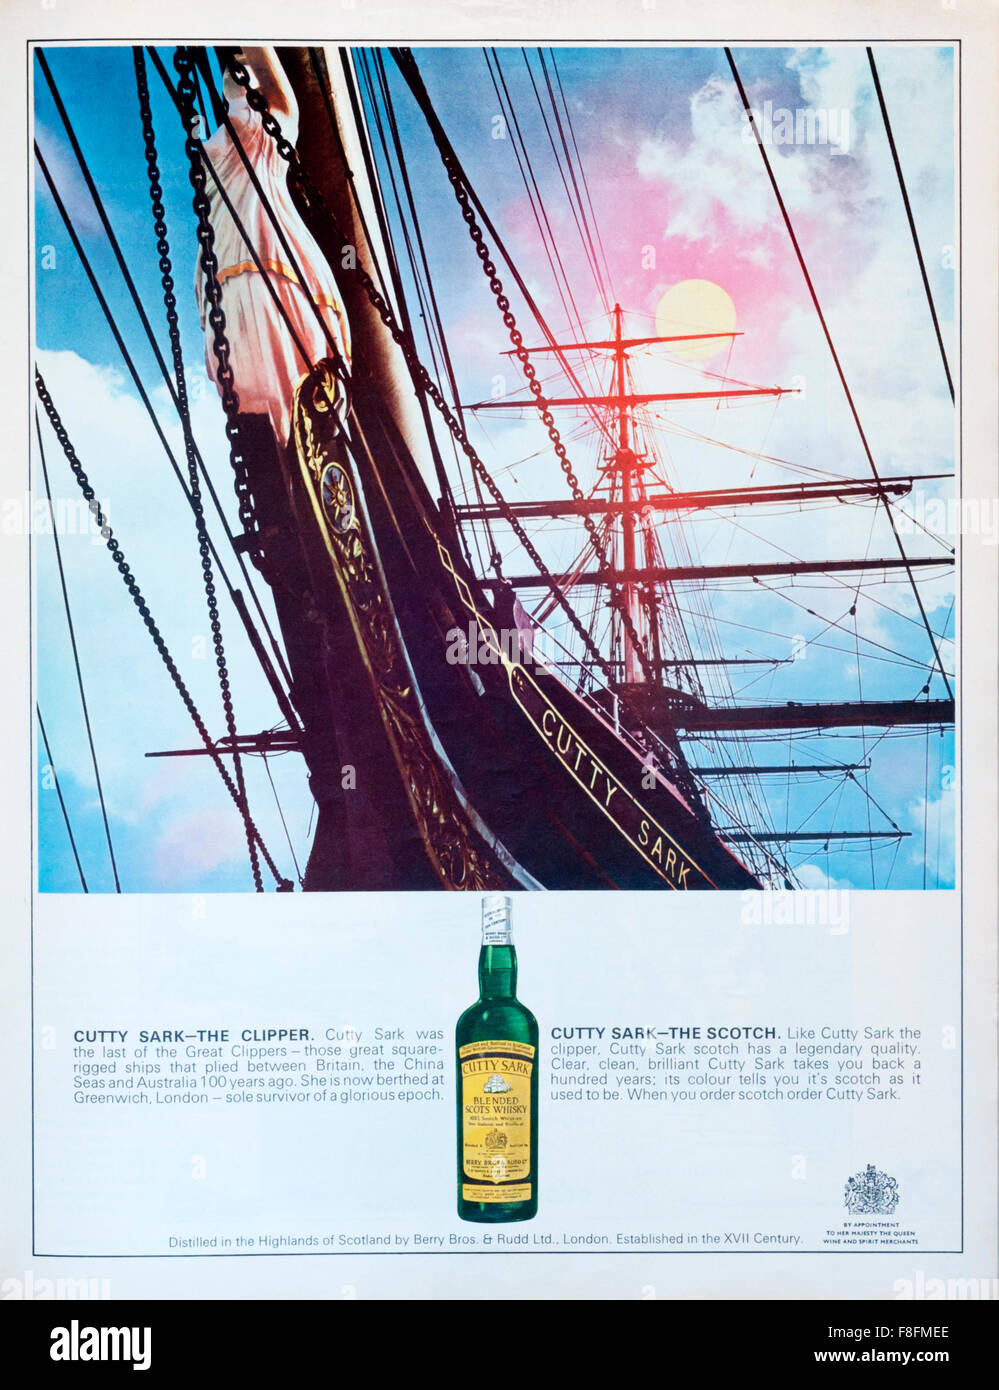 1960s magazine advertisement advertising Cutty Sark Blended Scotch Whisky. Stock Photo